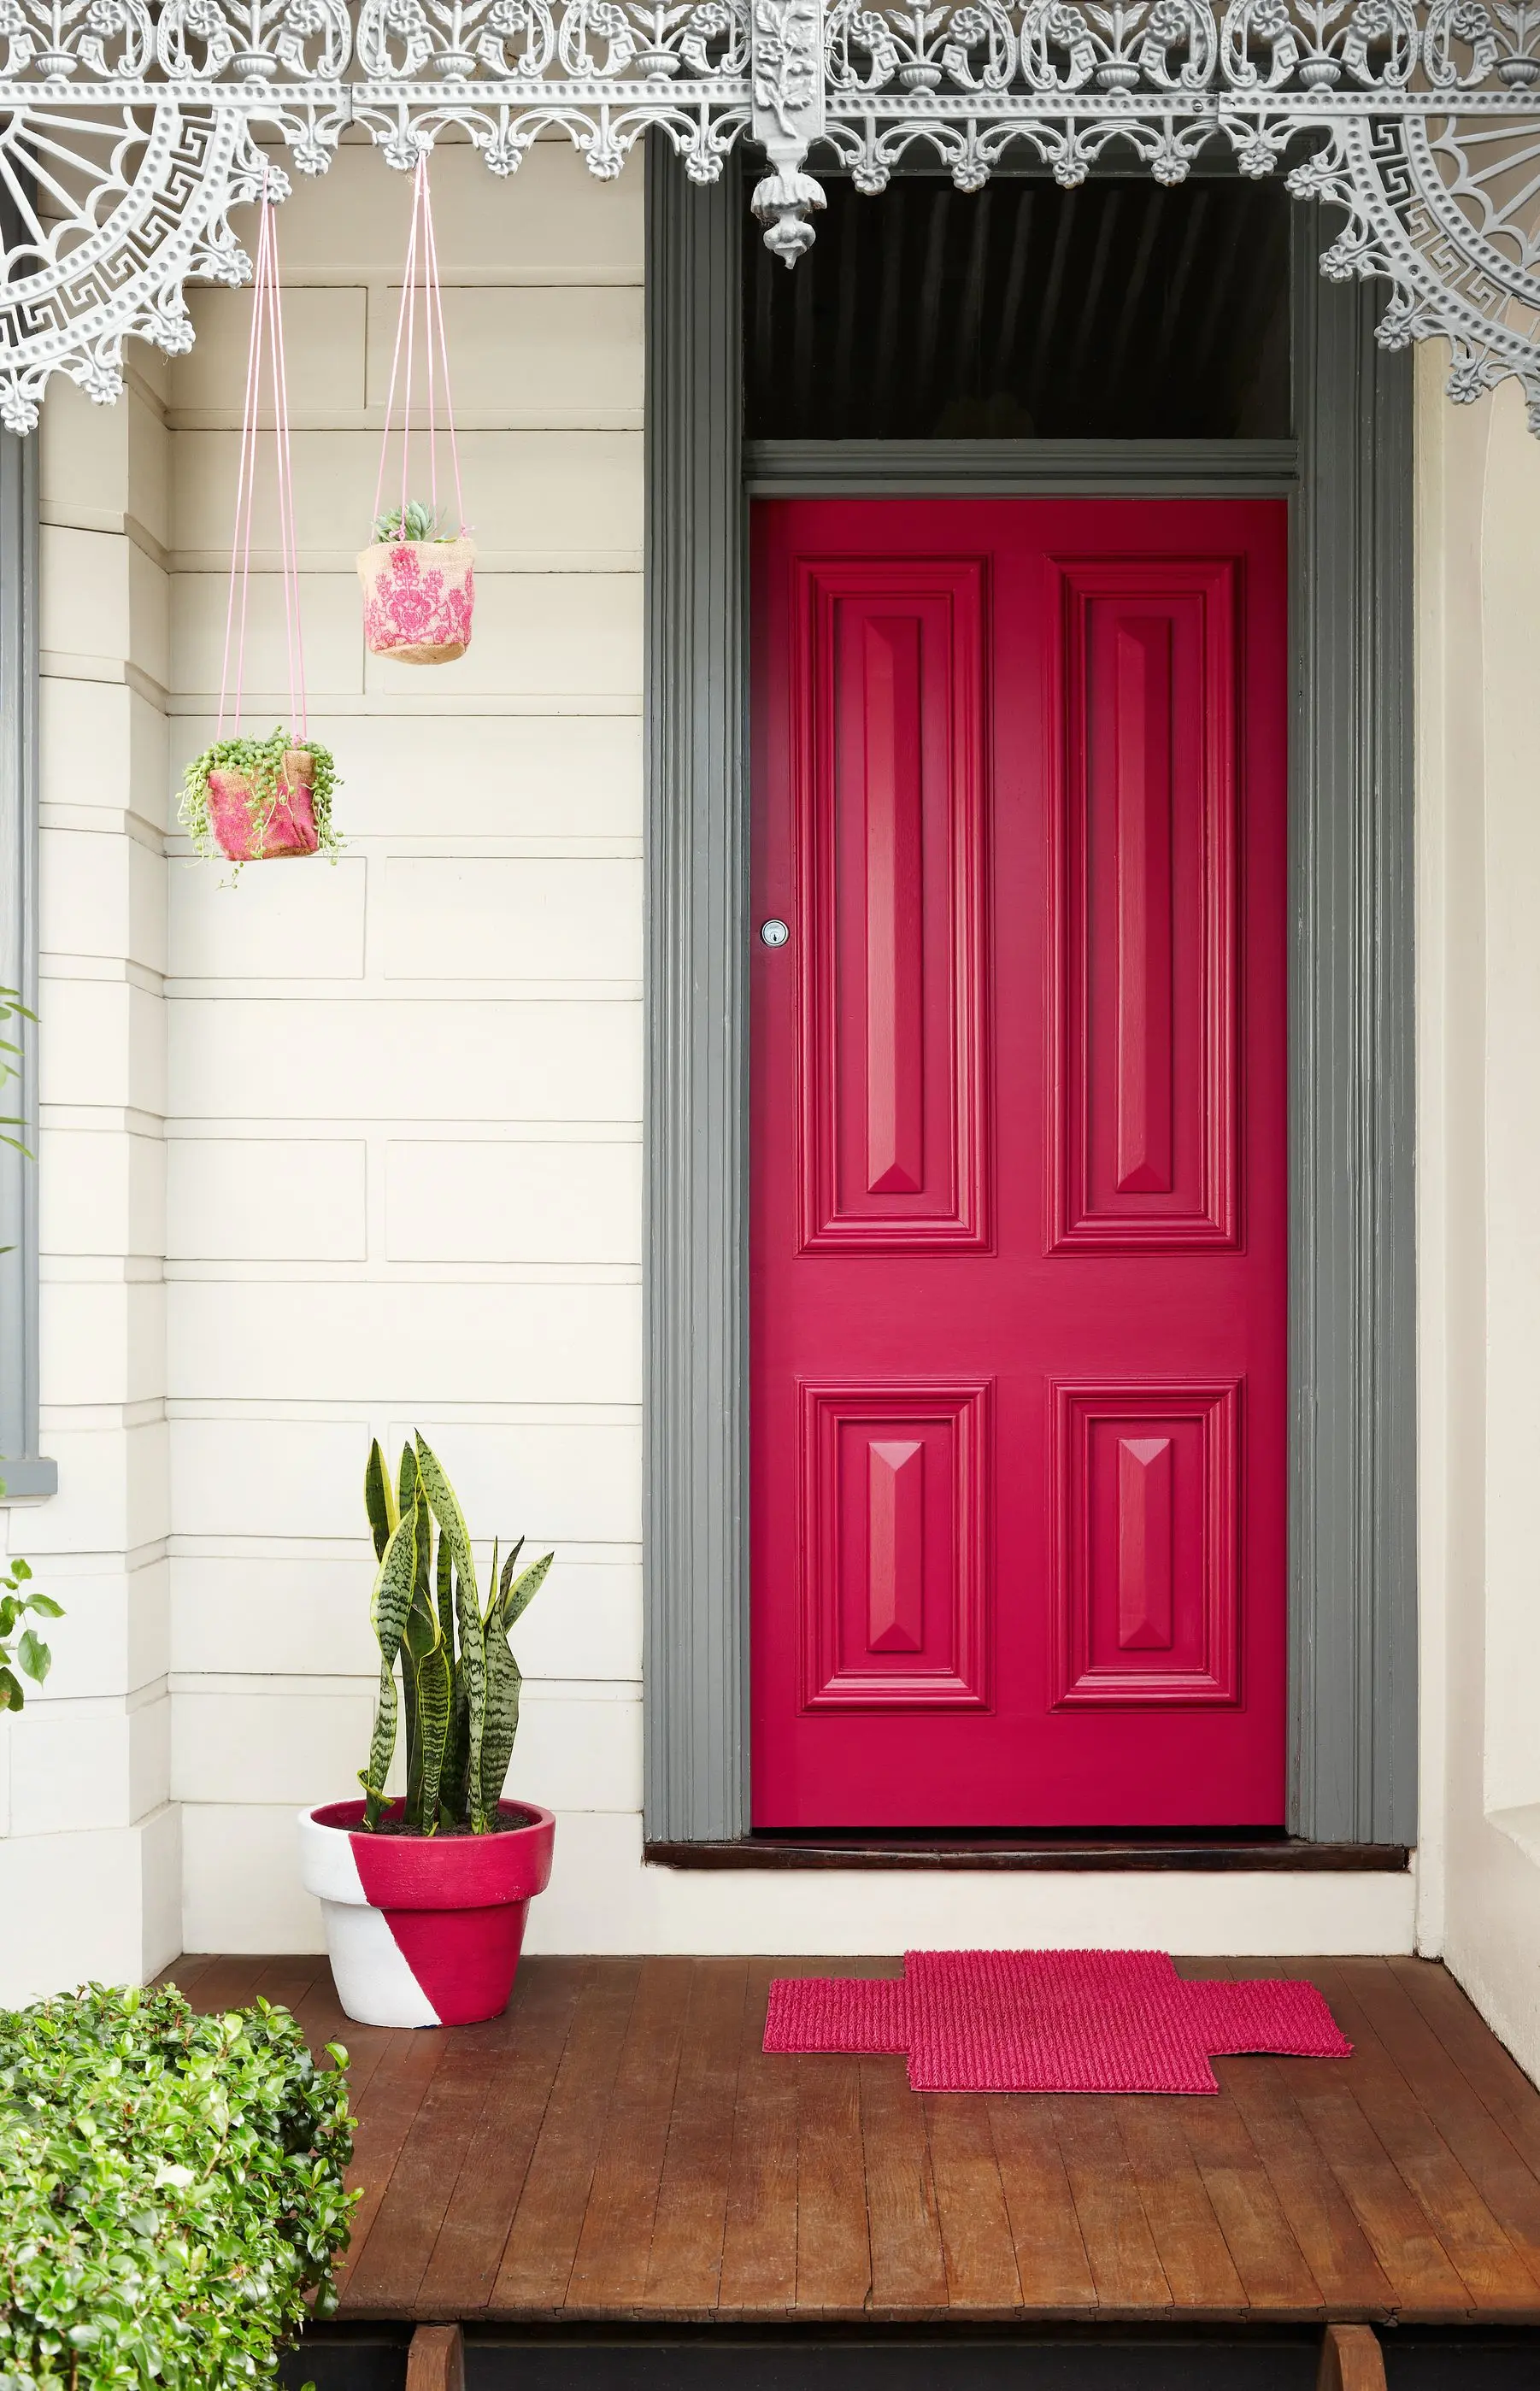 Narrow view of bright pink door with matching floor mat. Pot plant sitting beside door and hanging from roof.